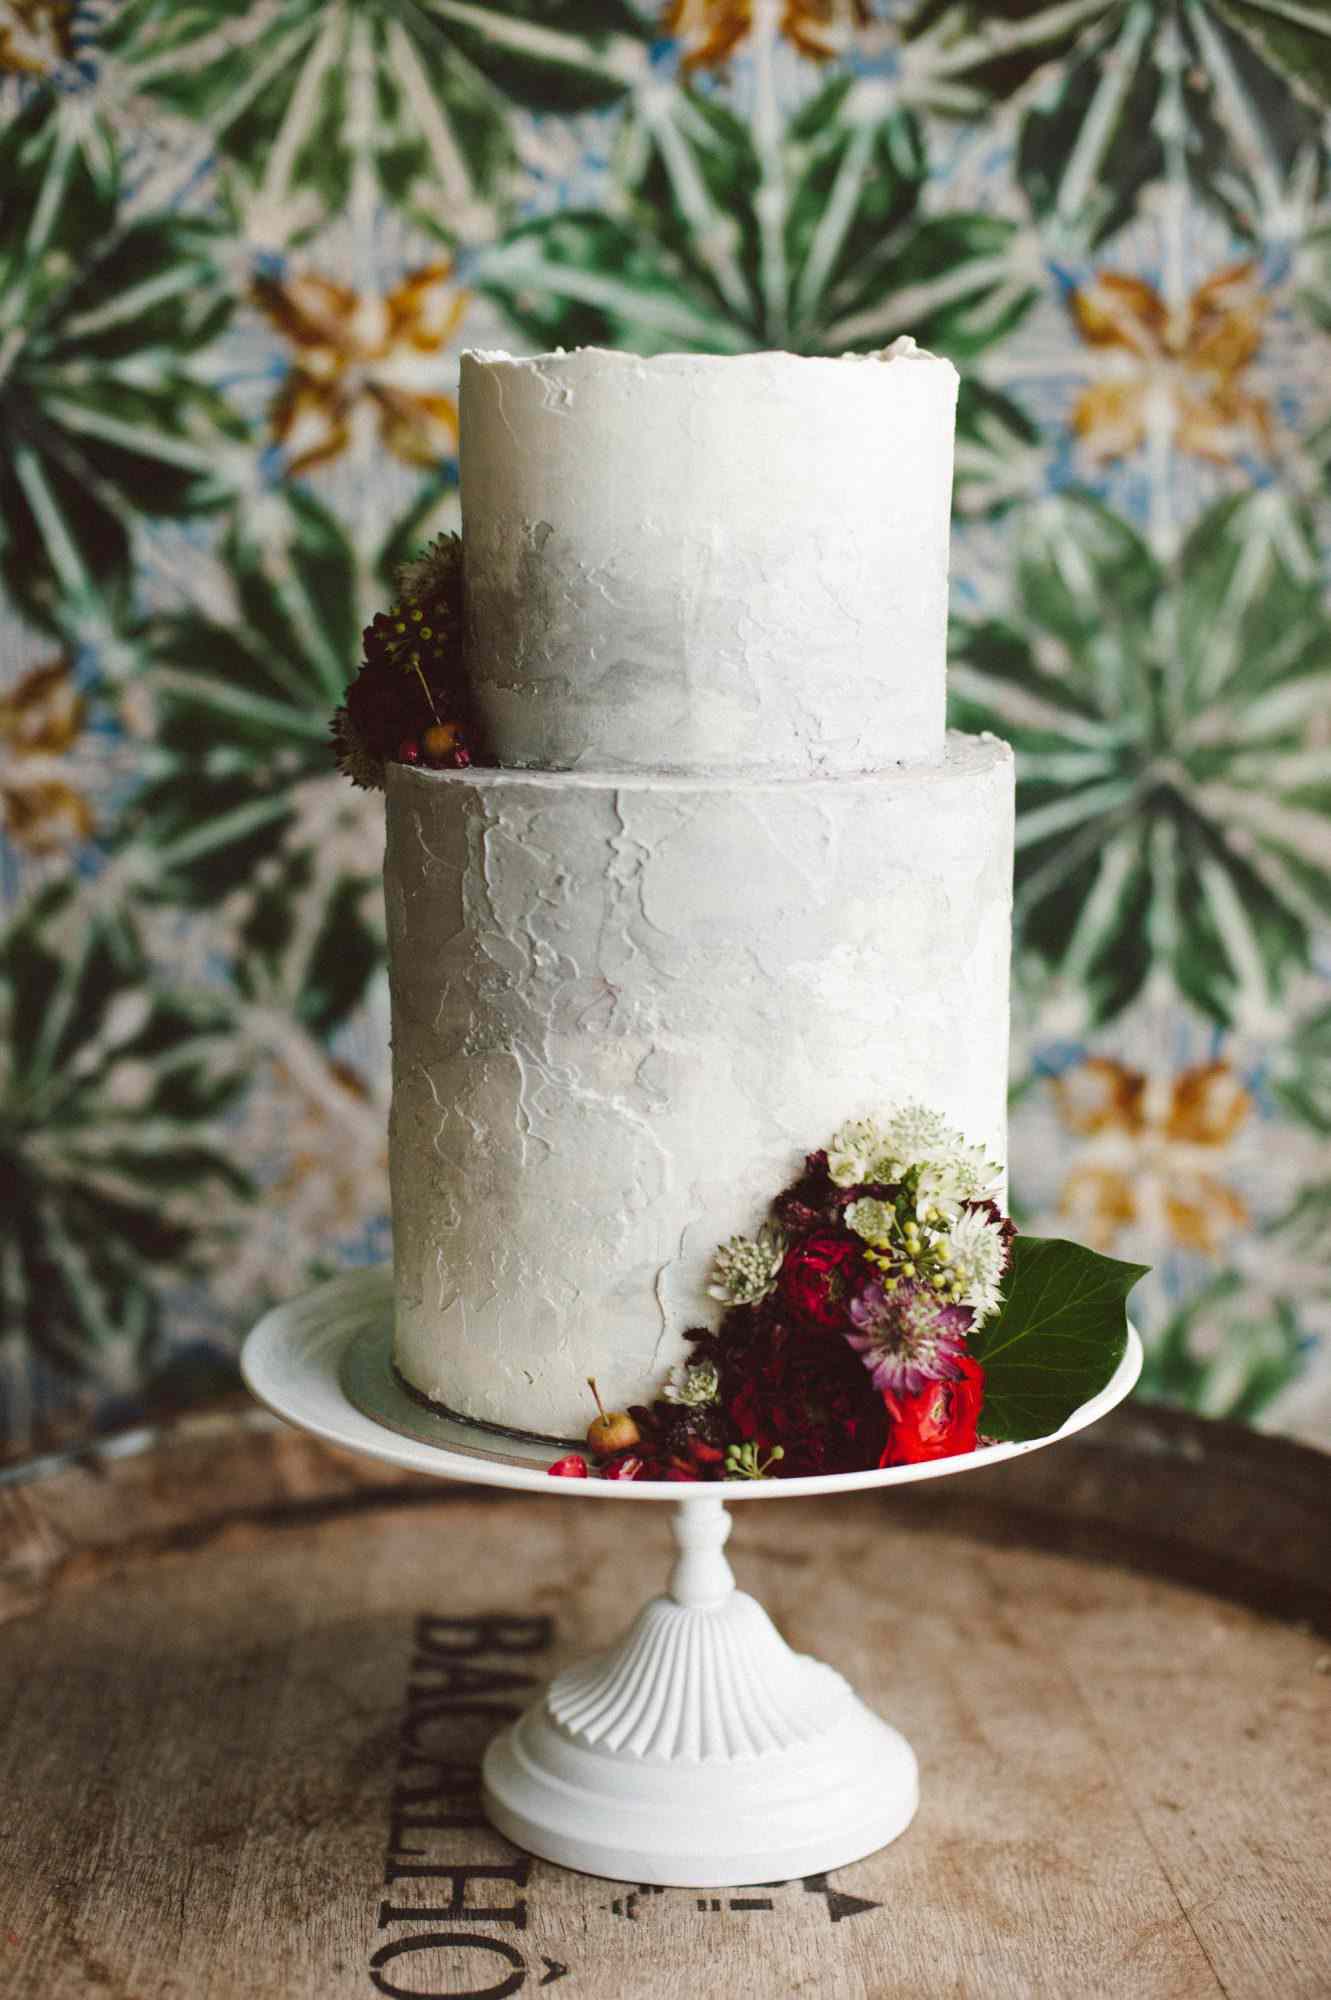 Gray-and-White Deckle-Edged Cake